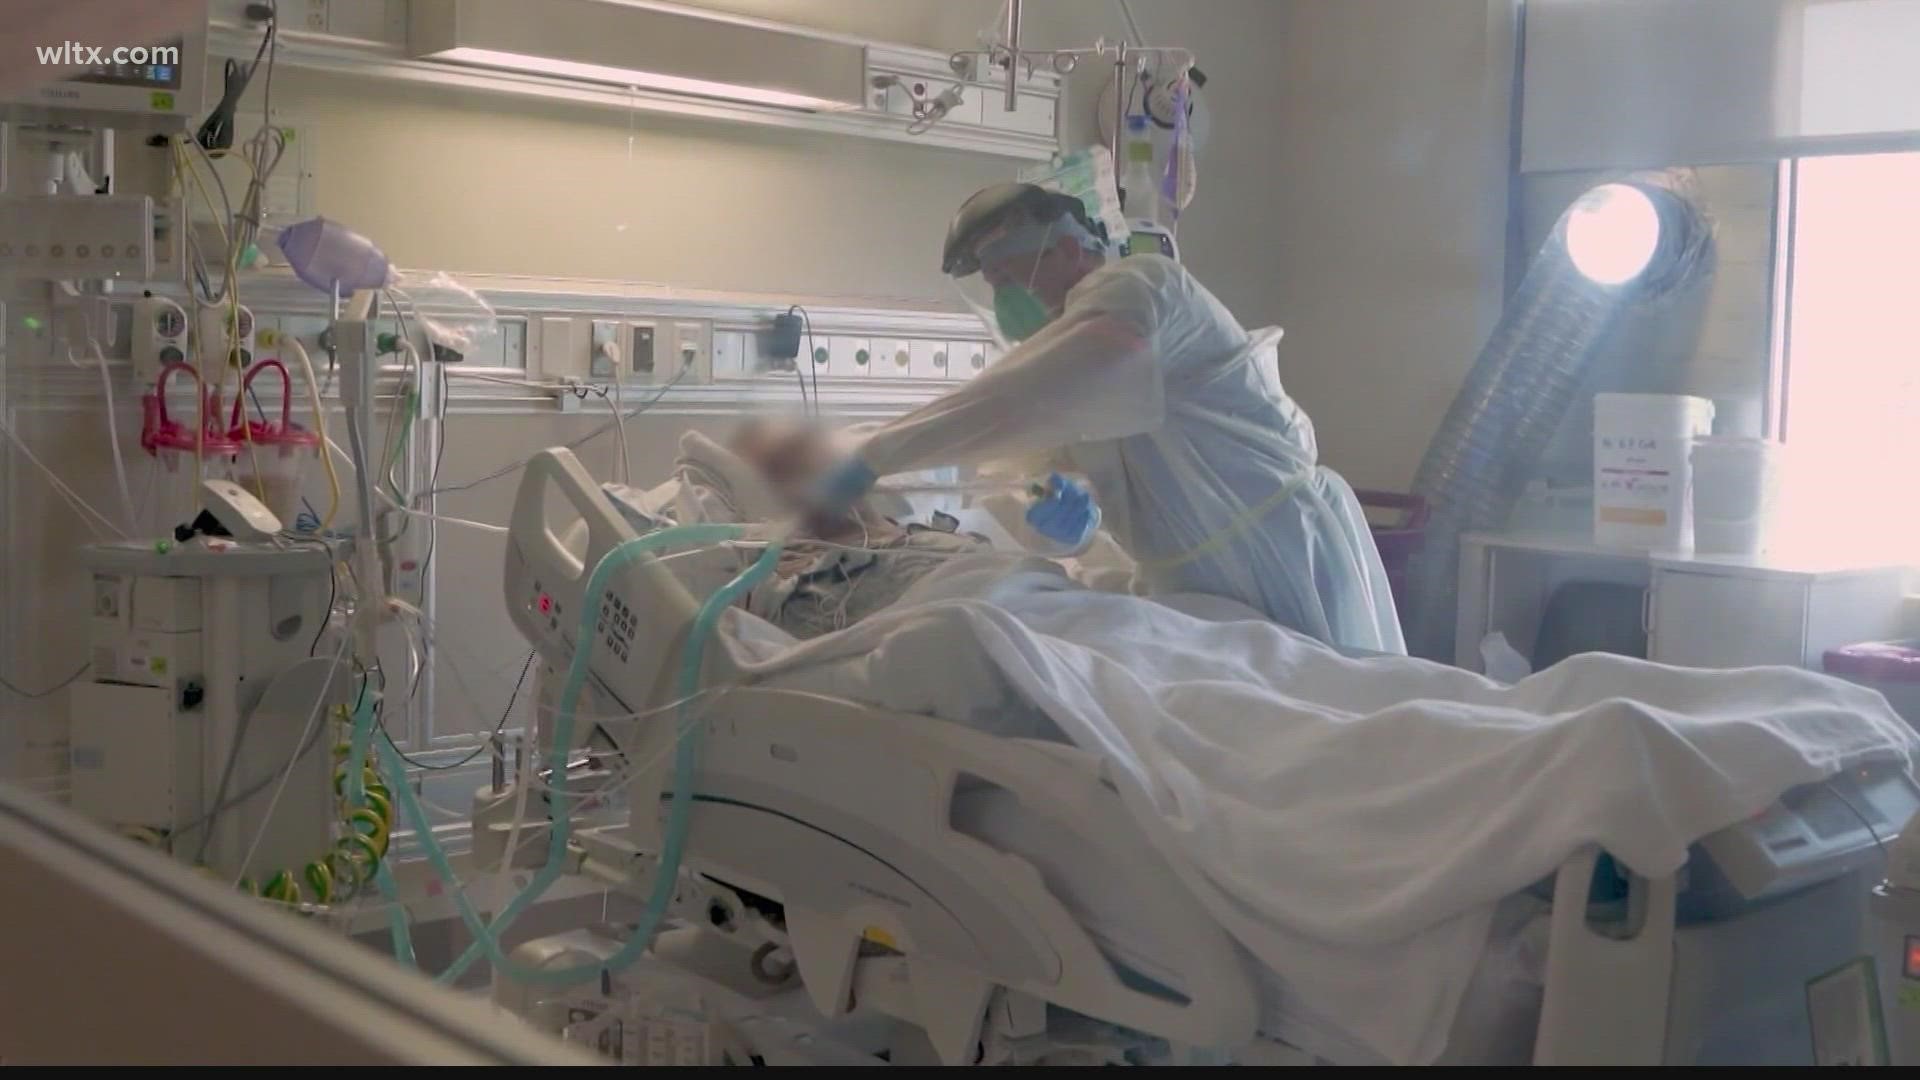 Hospital staff say ICU beds are filling up as COVID-19 case numbers climb